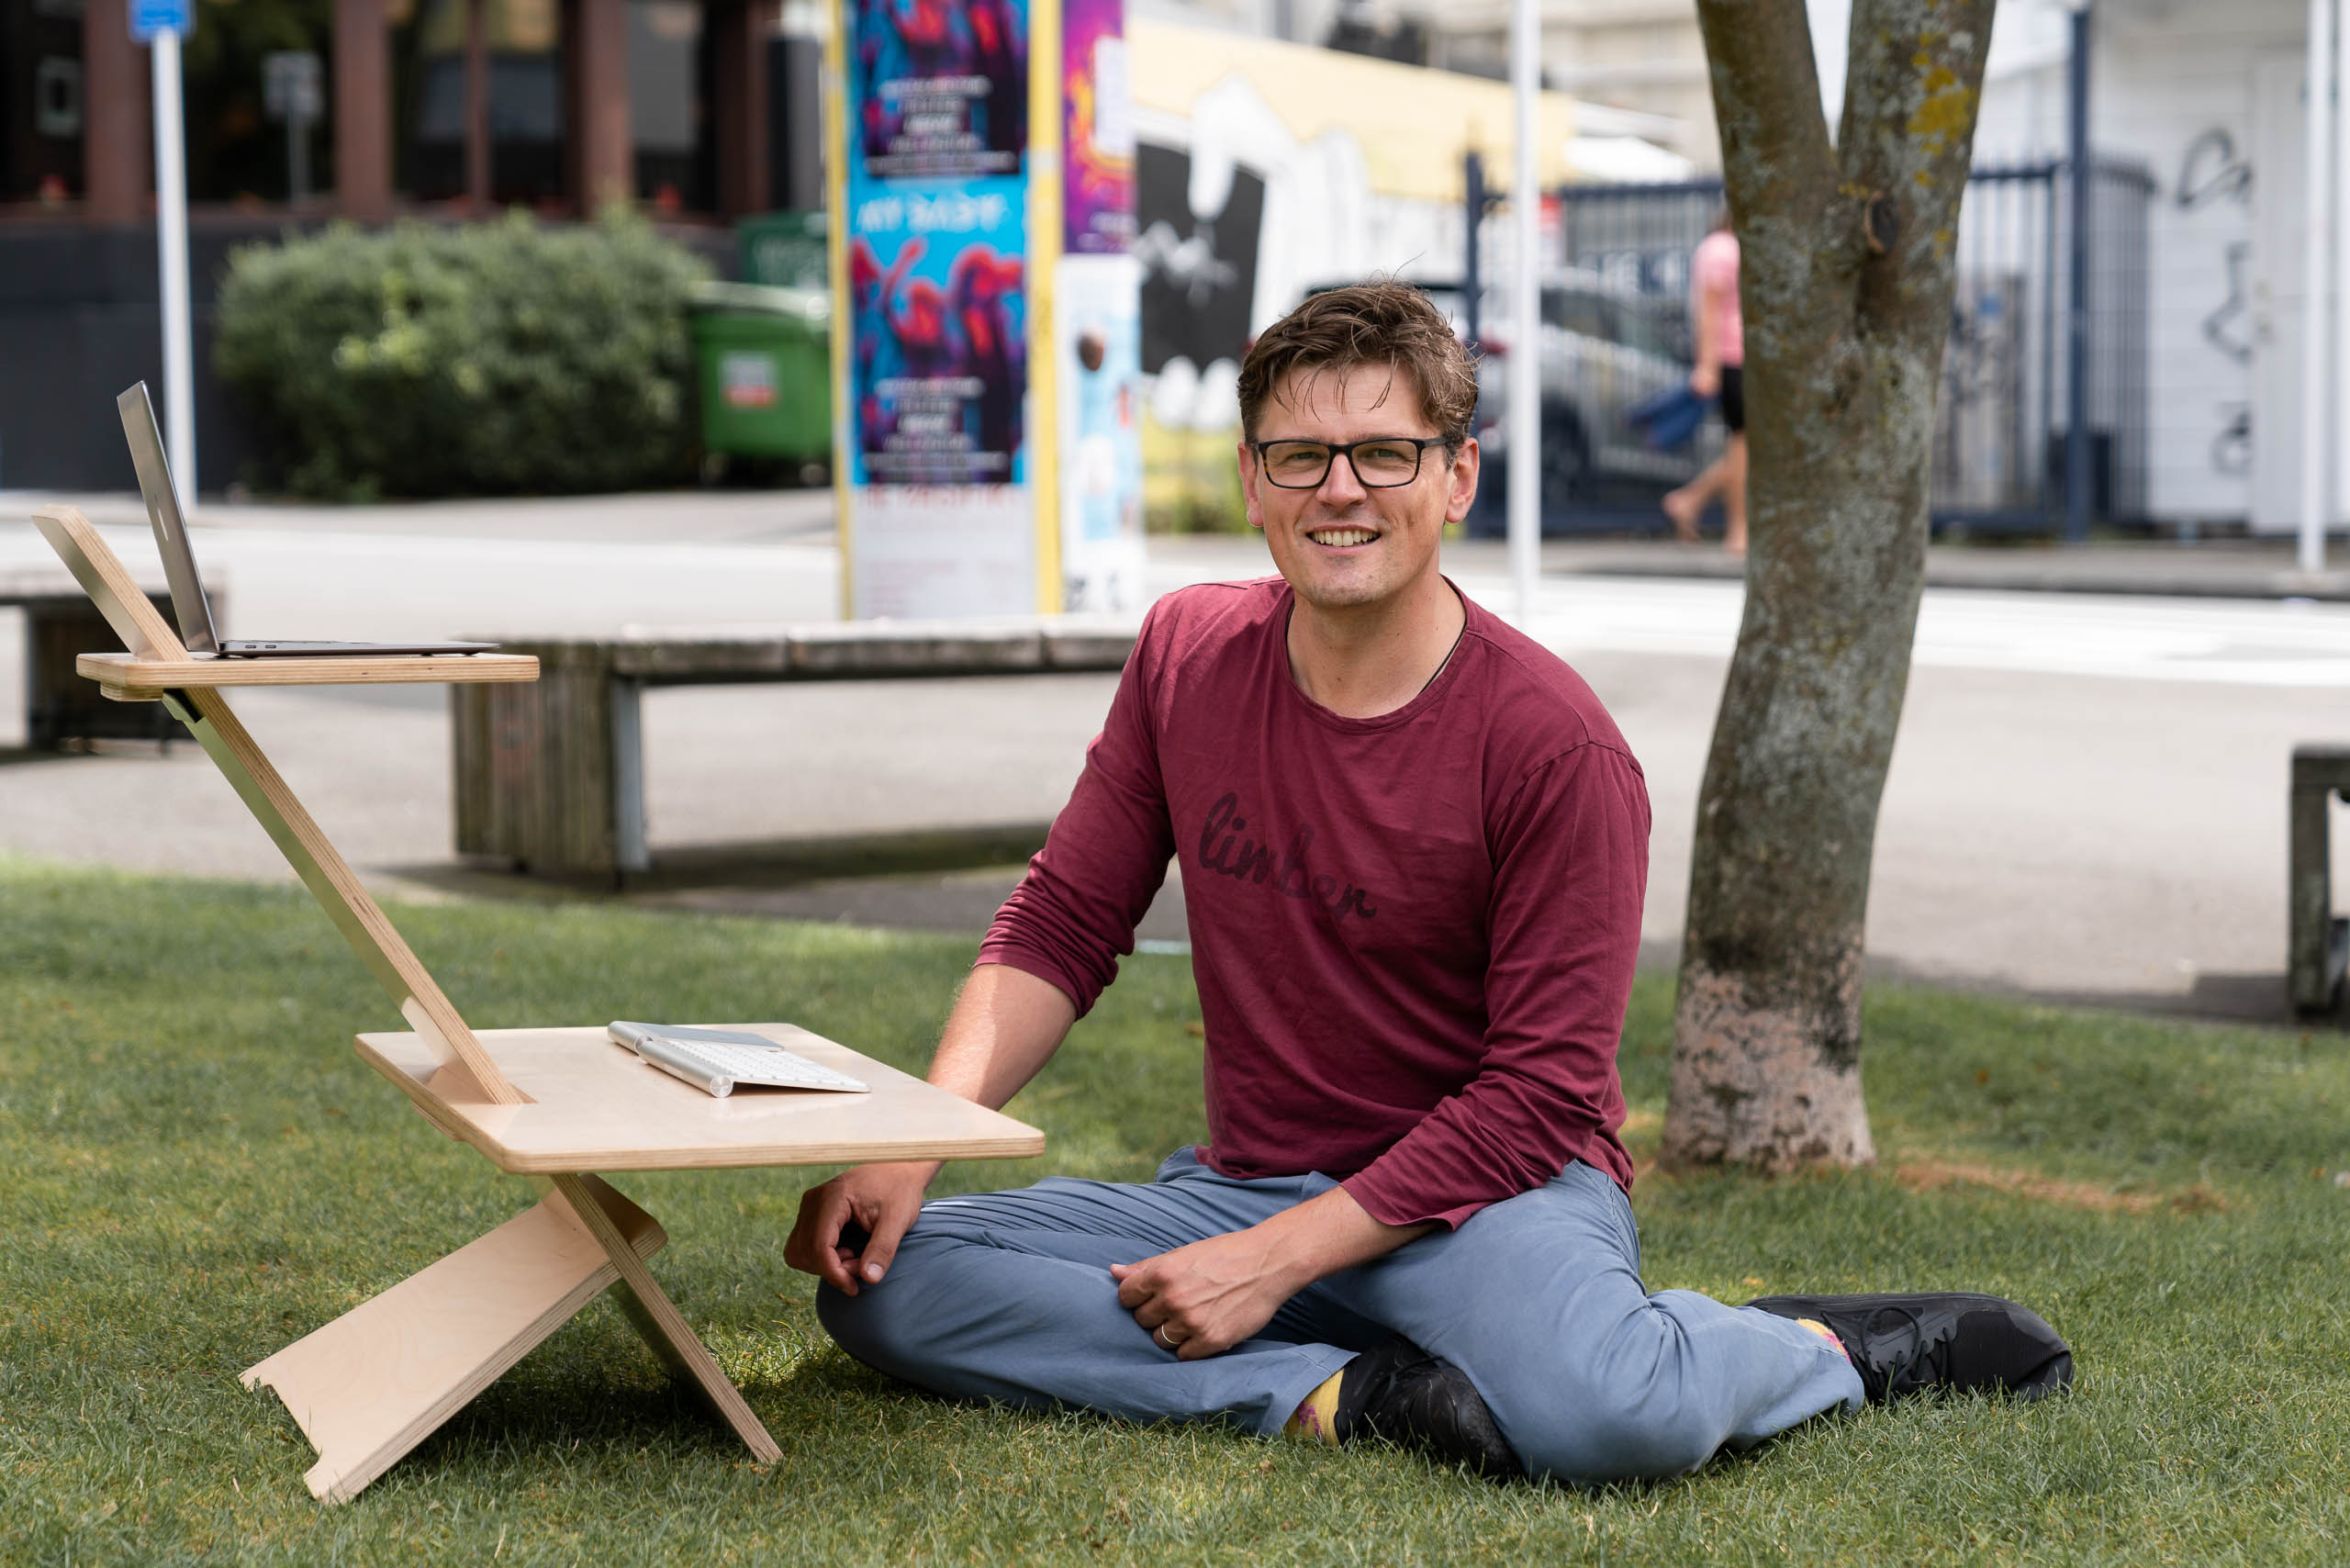 Limber founder Bart sitting at a Limber Mini desk in a park in central Wellington.